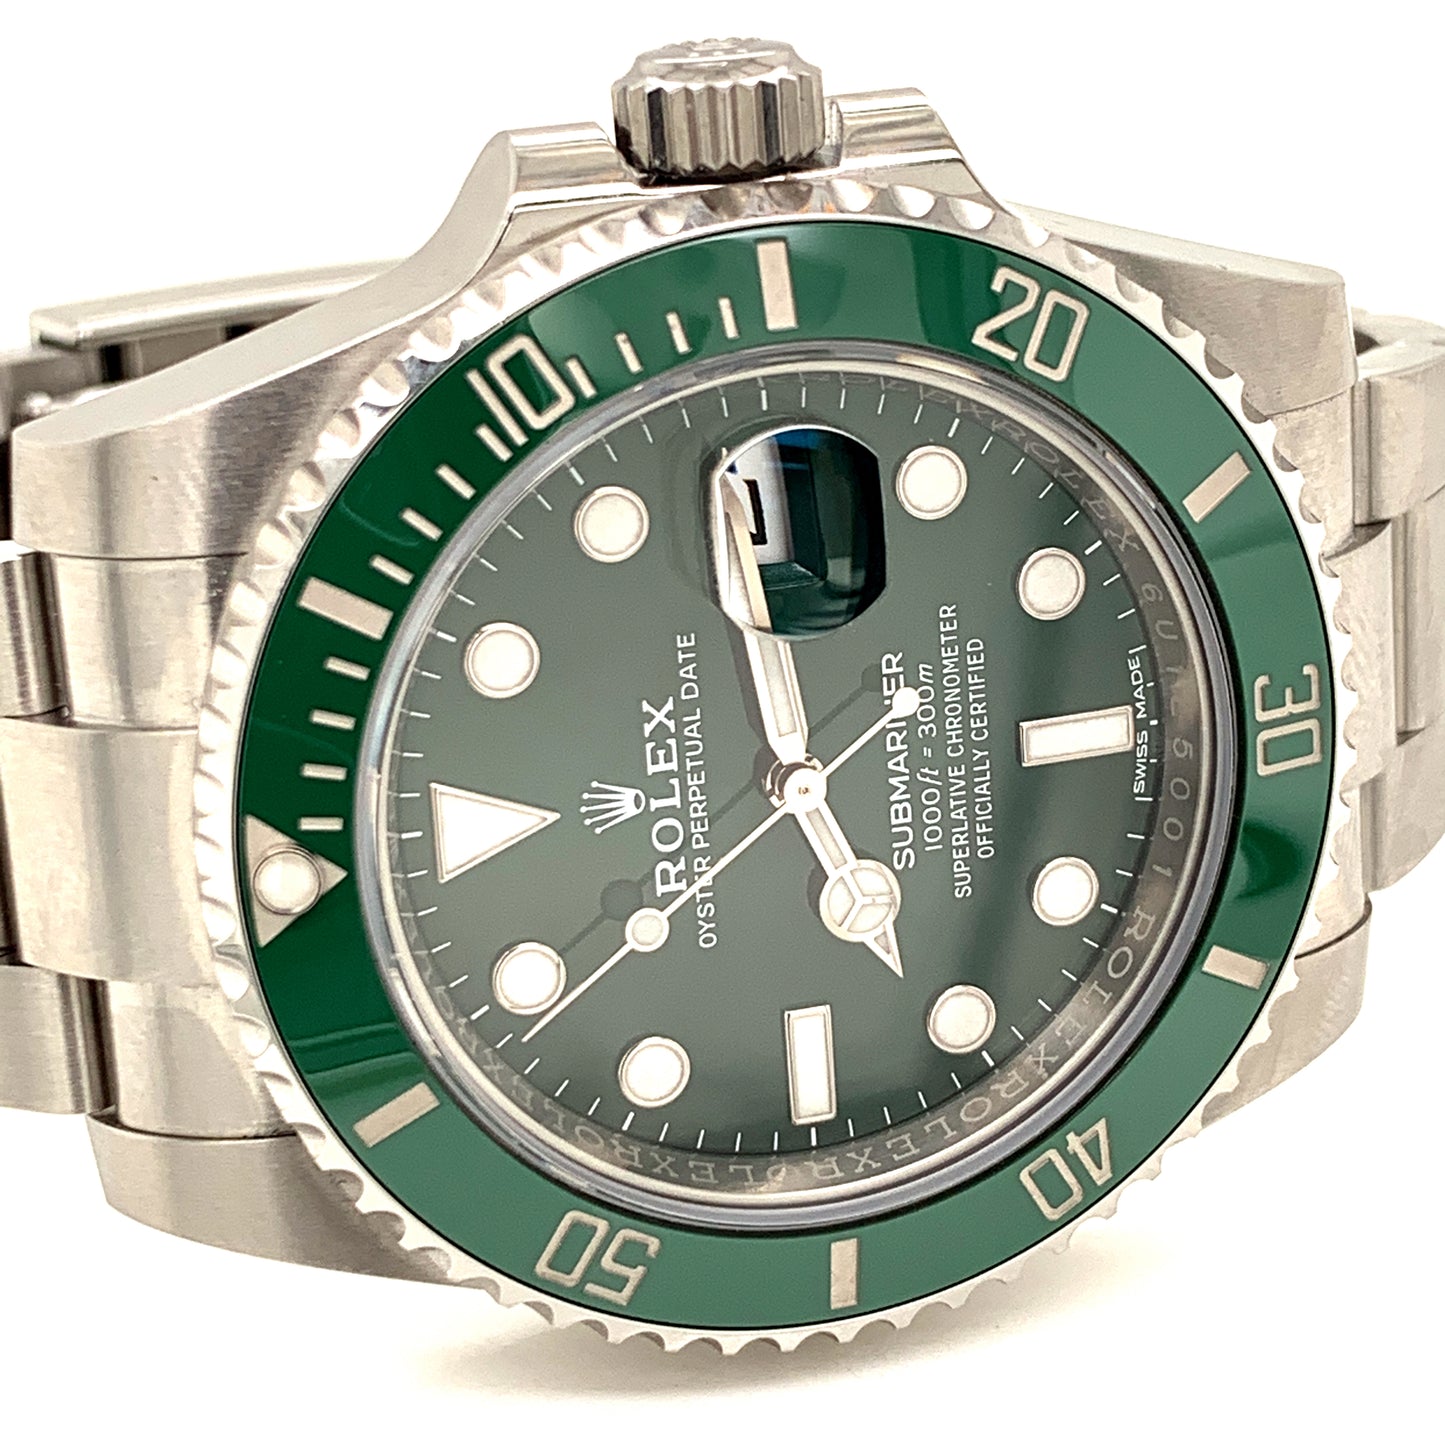 Rolex Submariner 116610LV Dlc-Pvd Stainless Steel Green Ceramic Bezel Green Dial Automatic 40mm Mens Watch